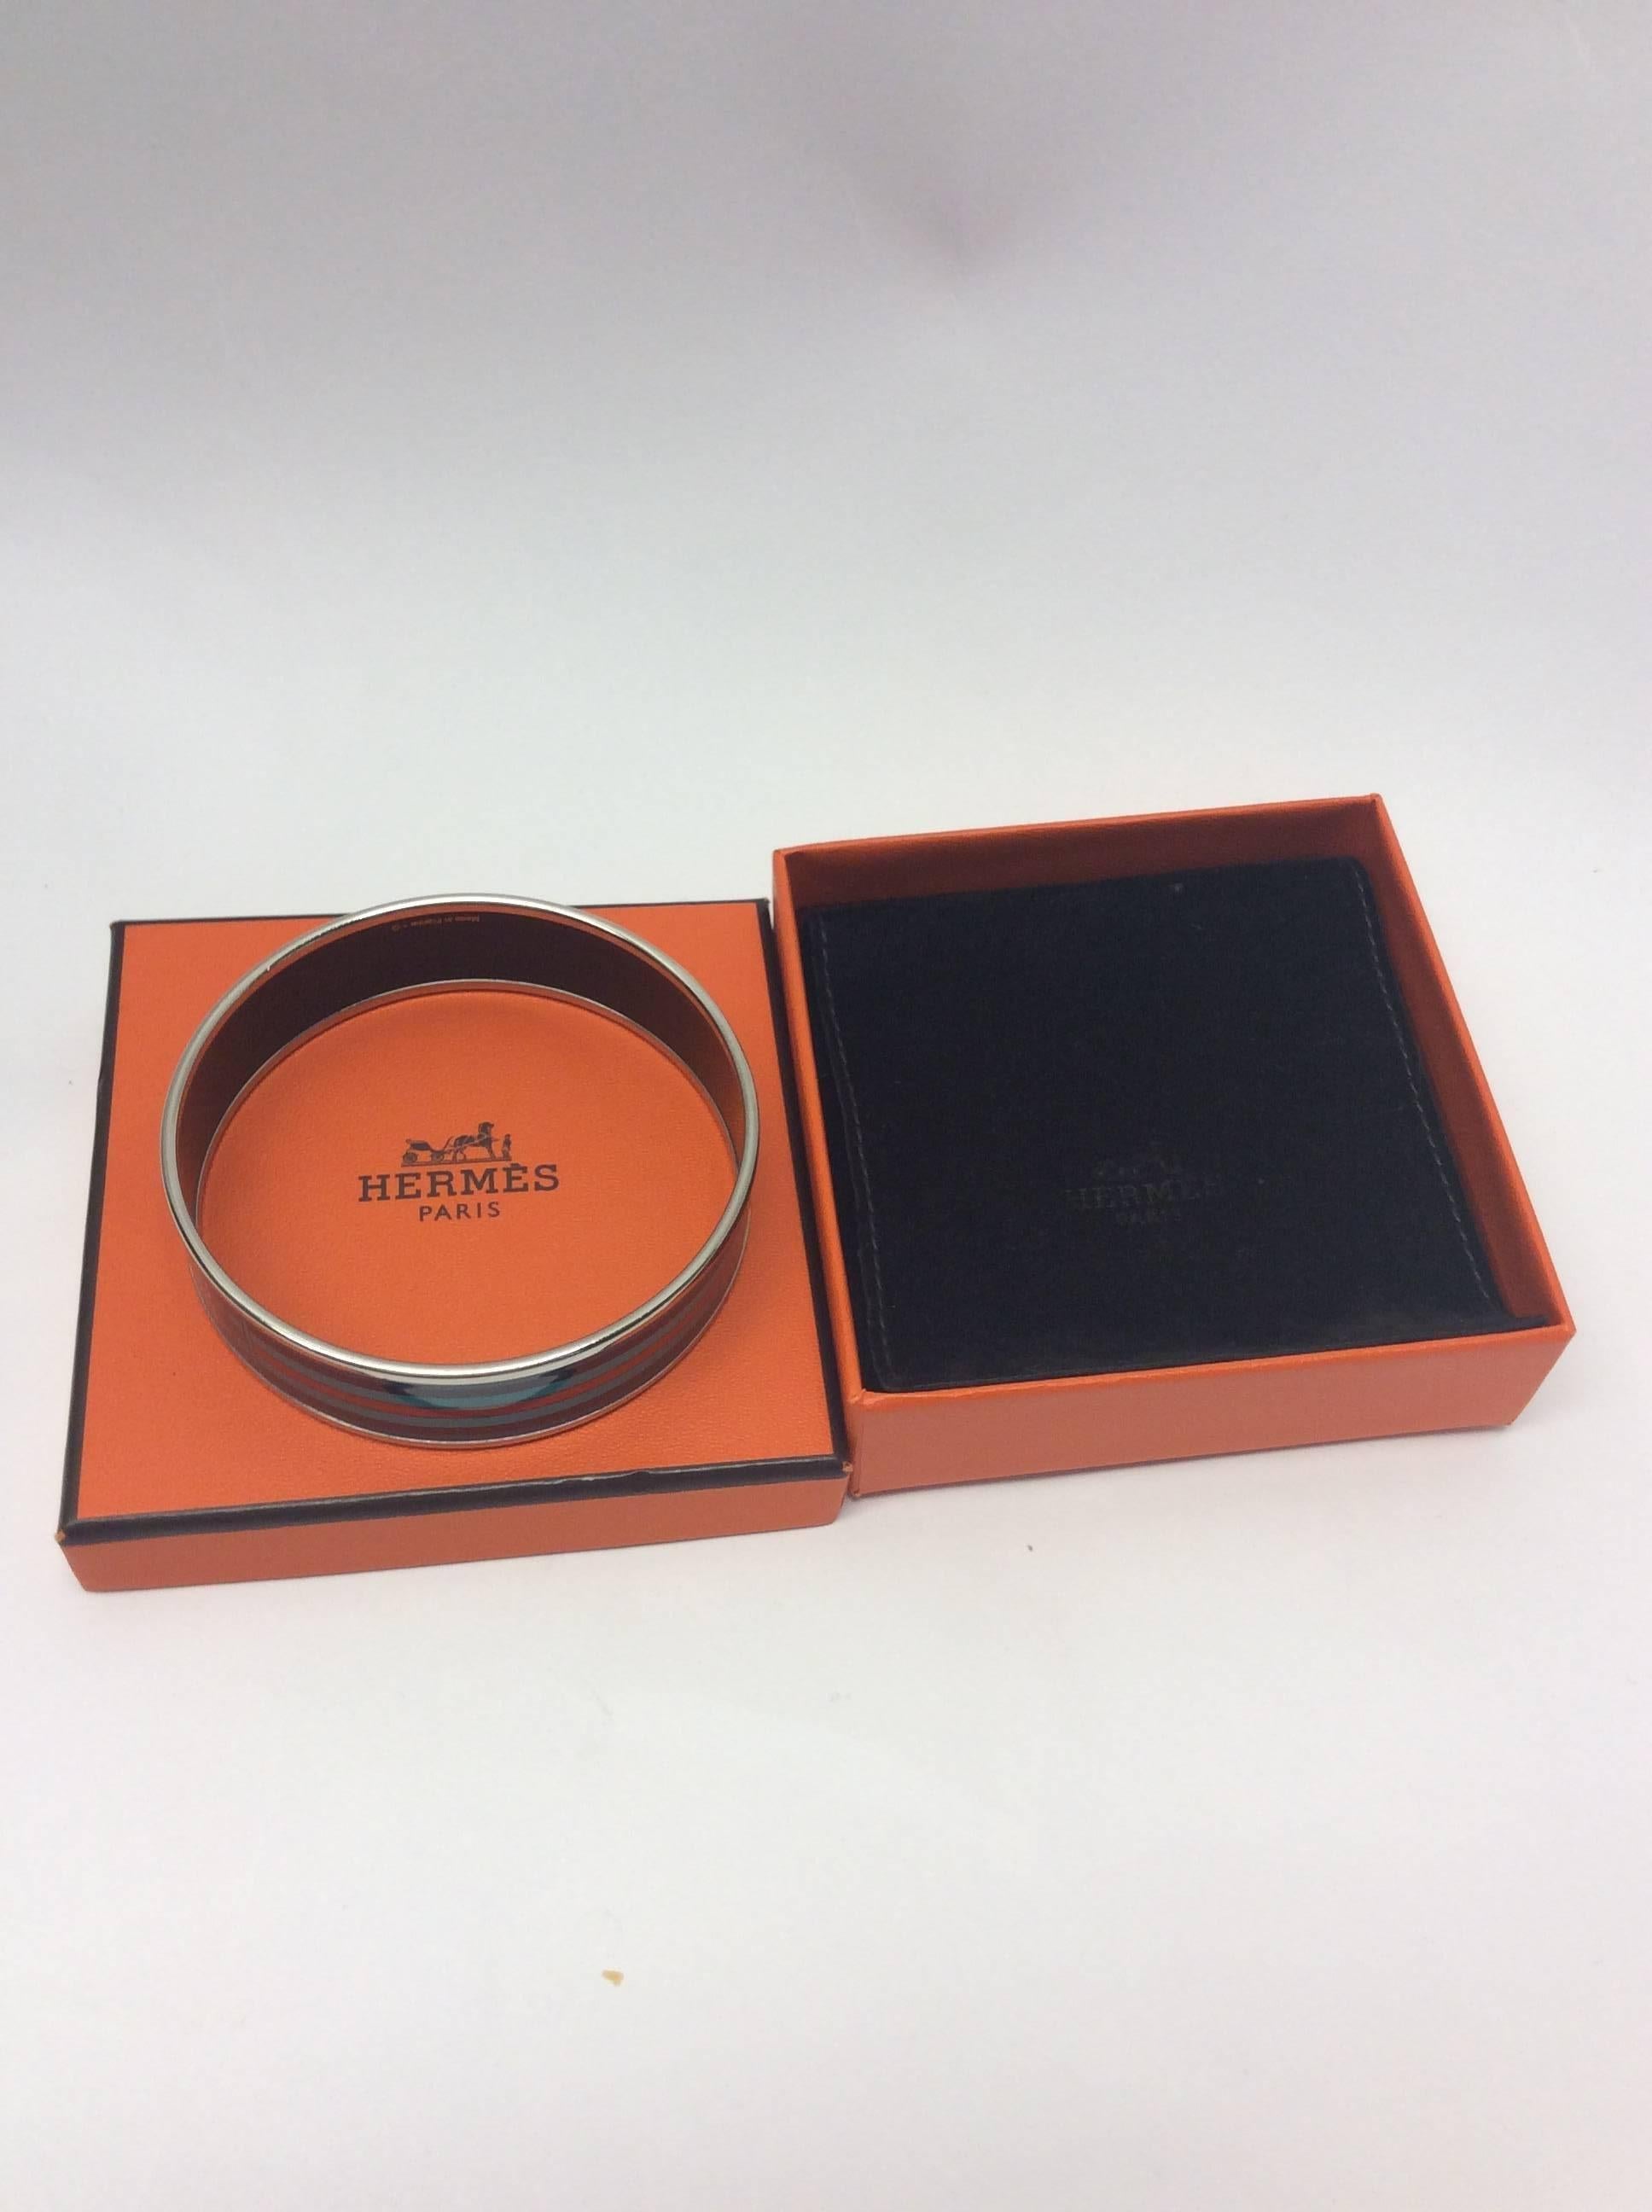 Hermes Belt Printed Enamel Silver Bangle
Comes with box
3 inch diameter
Made in France
$399